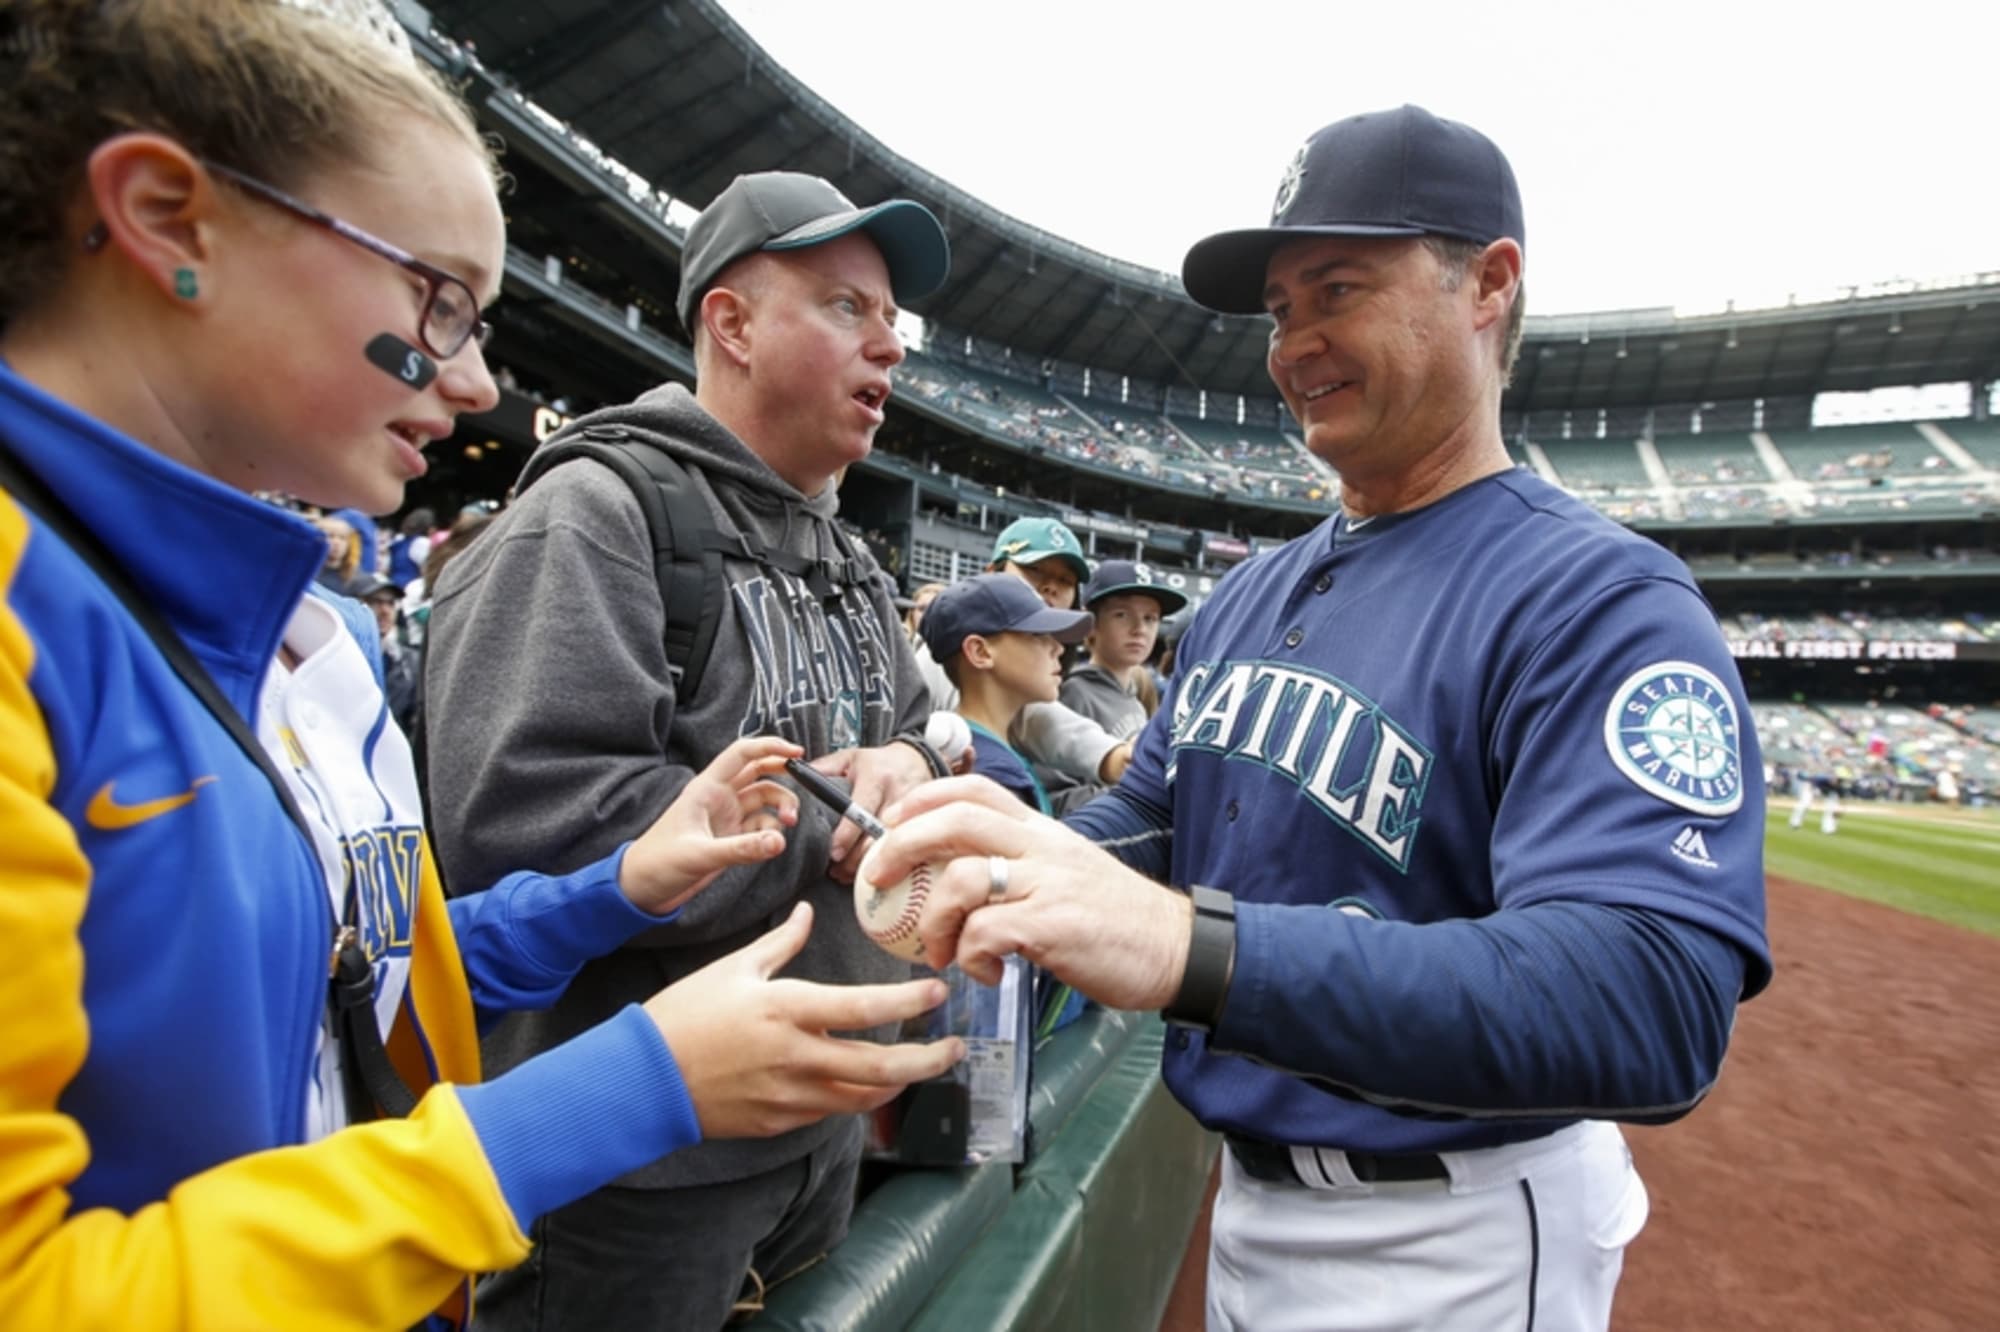 Mariners: Successful Season, But Not Enough to End the Drought